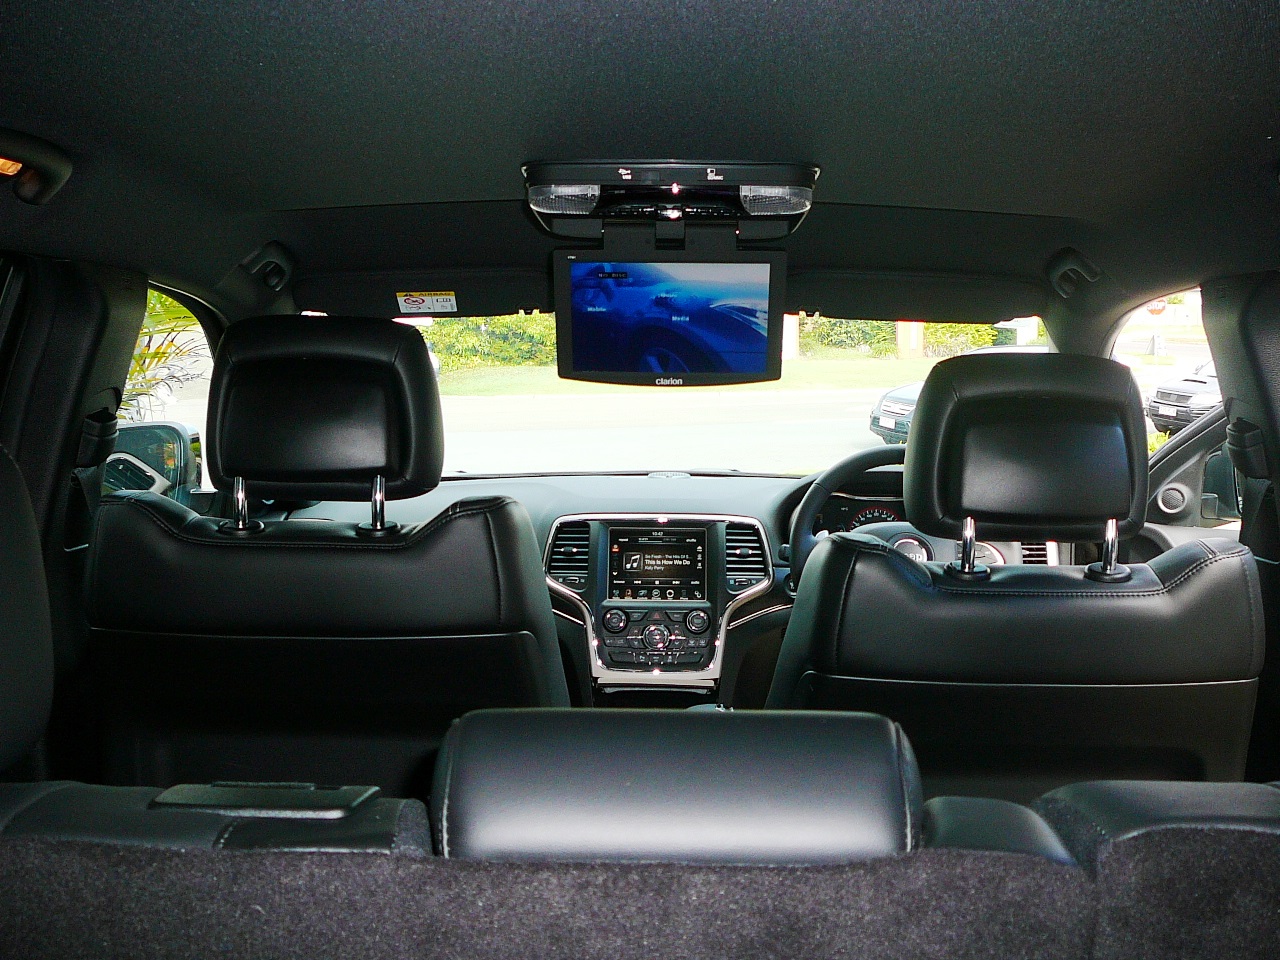 Jeep Grand Cherokee, Clarion VTM1 DVD USB Roofscreen Installation